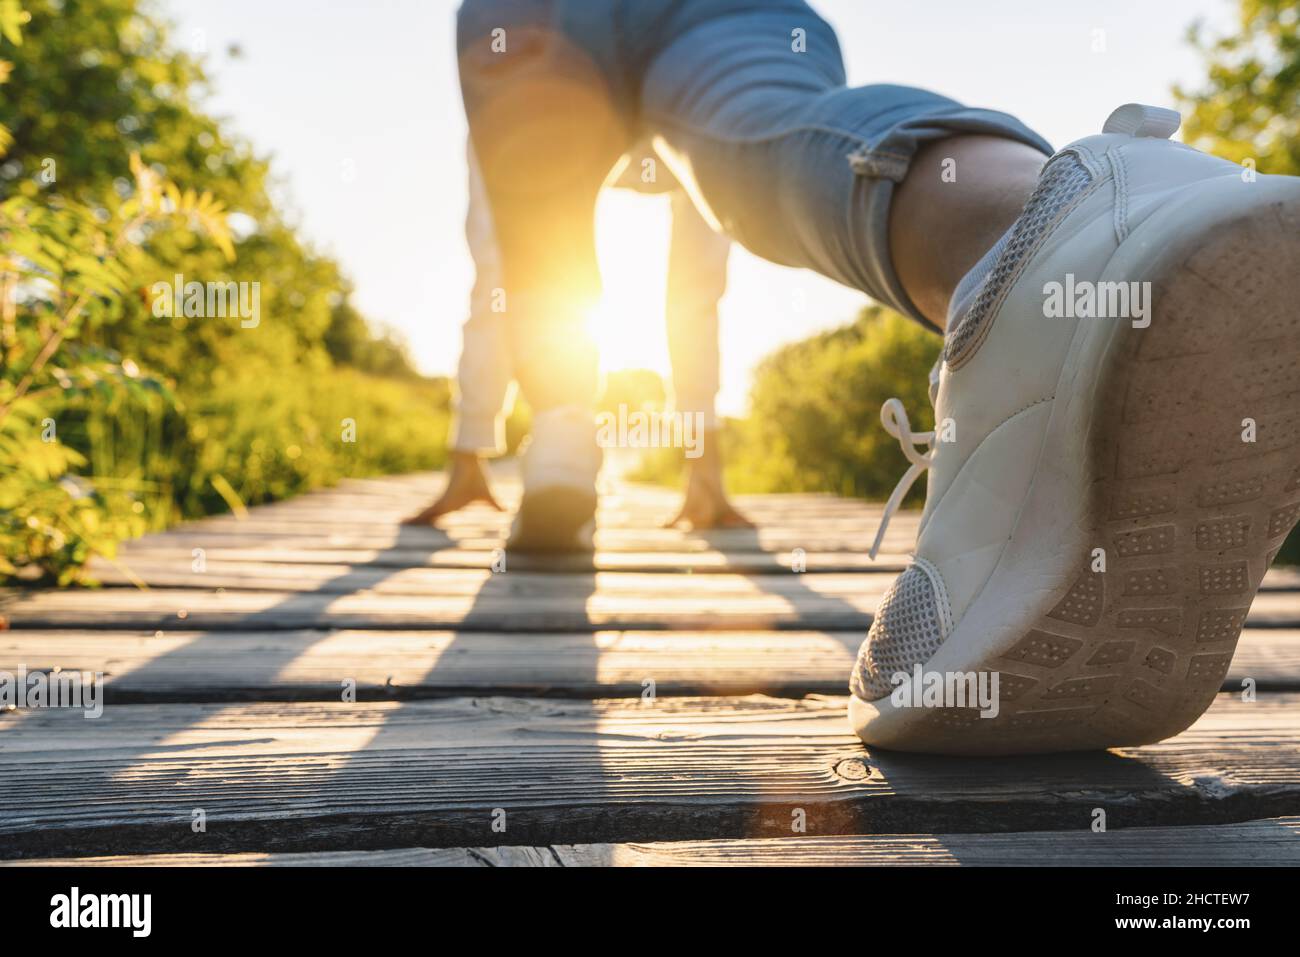 young woman starts to running at a boardwalk at sunset, runner sport athlete concept image Stock Photo